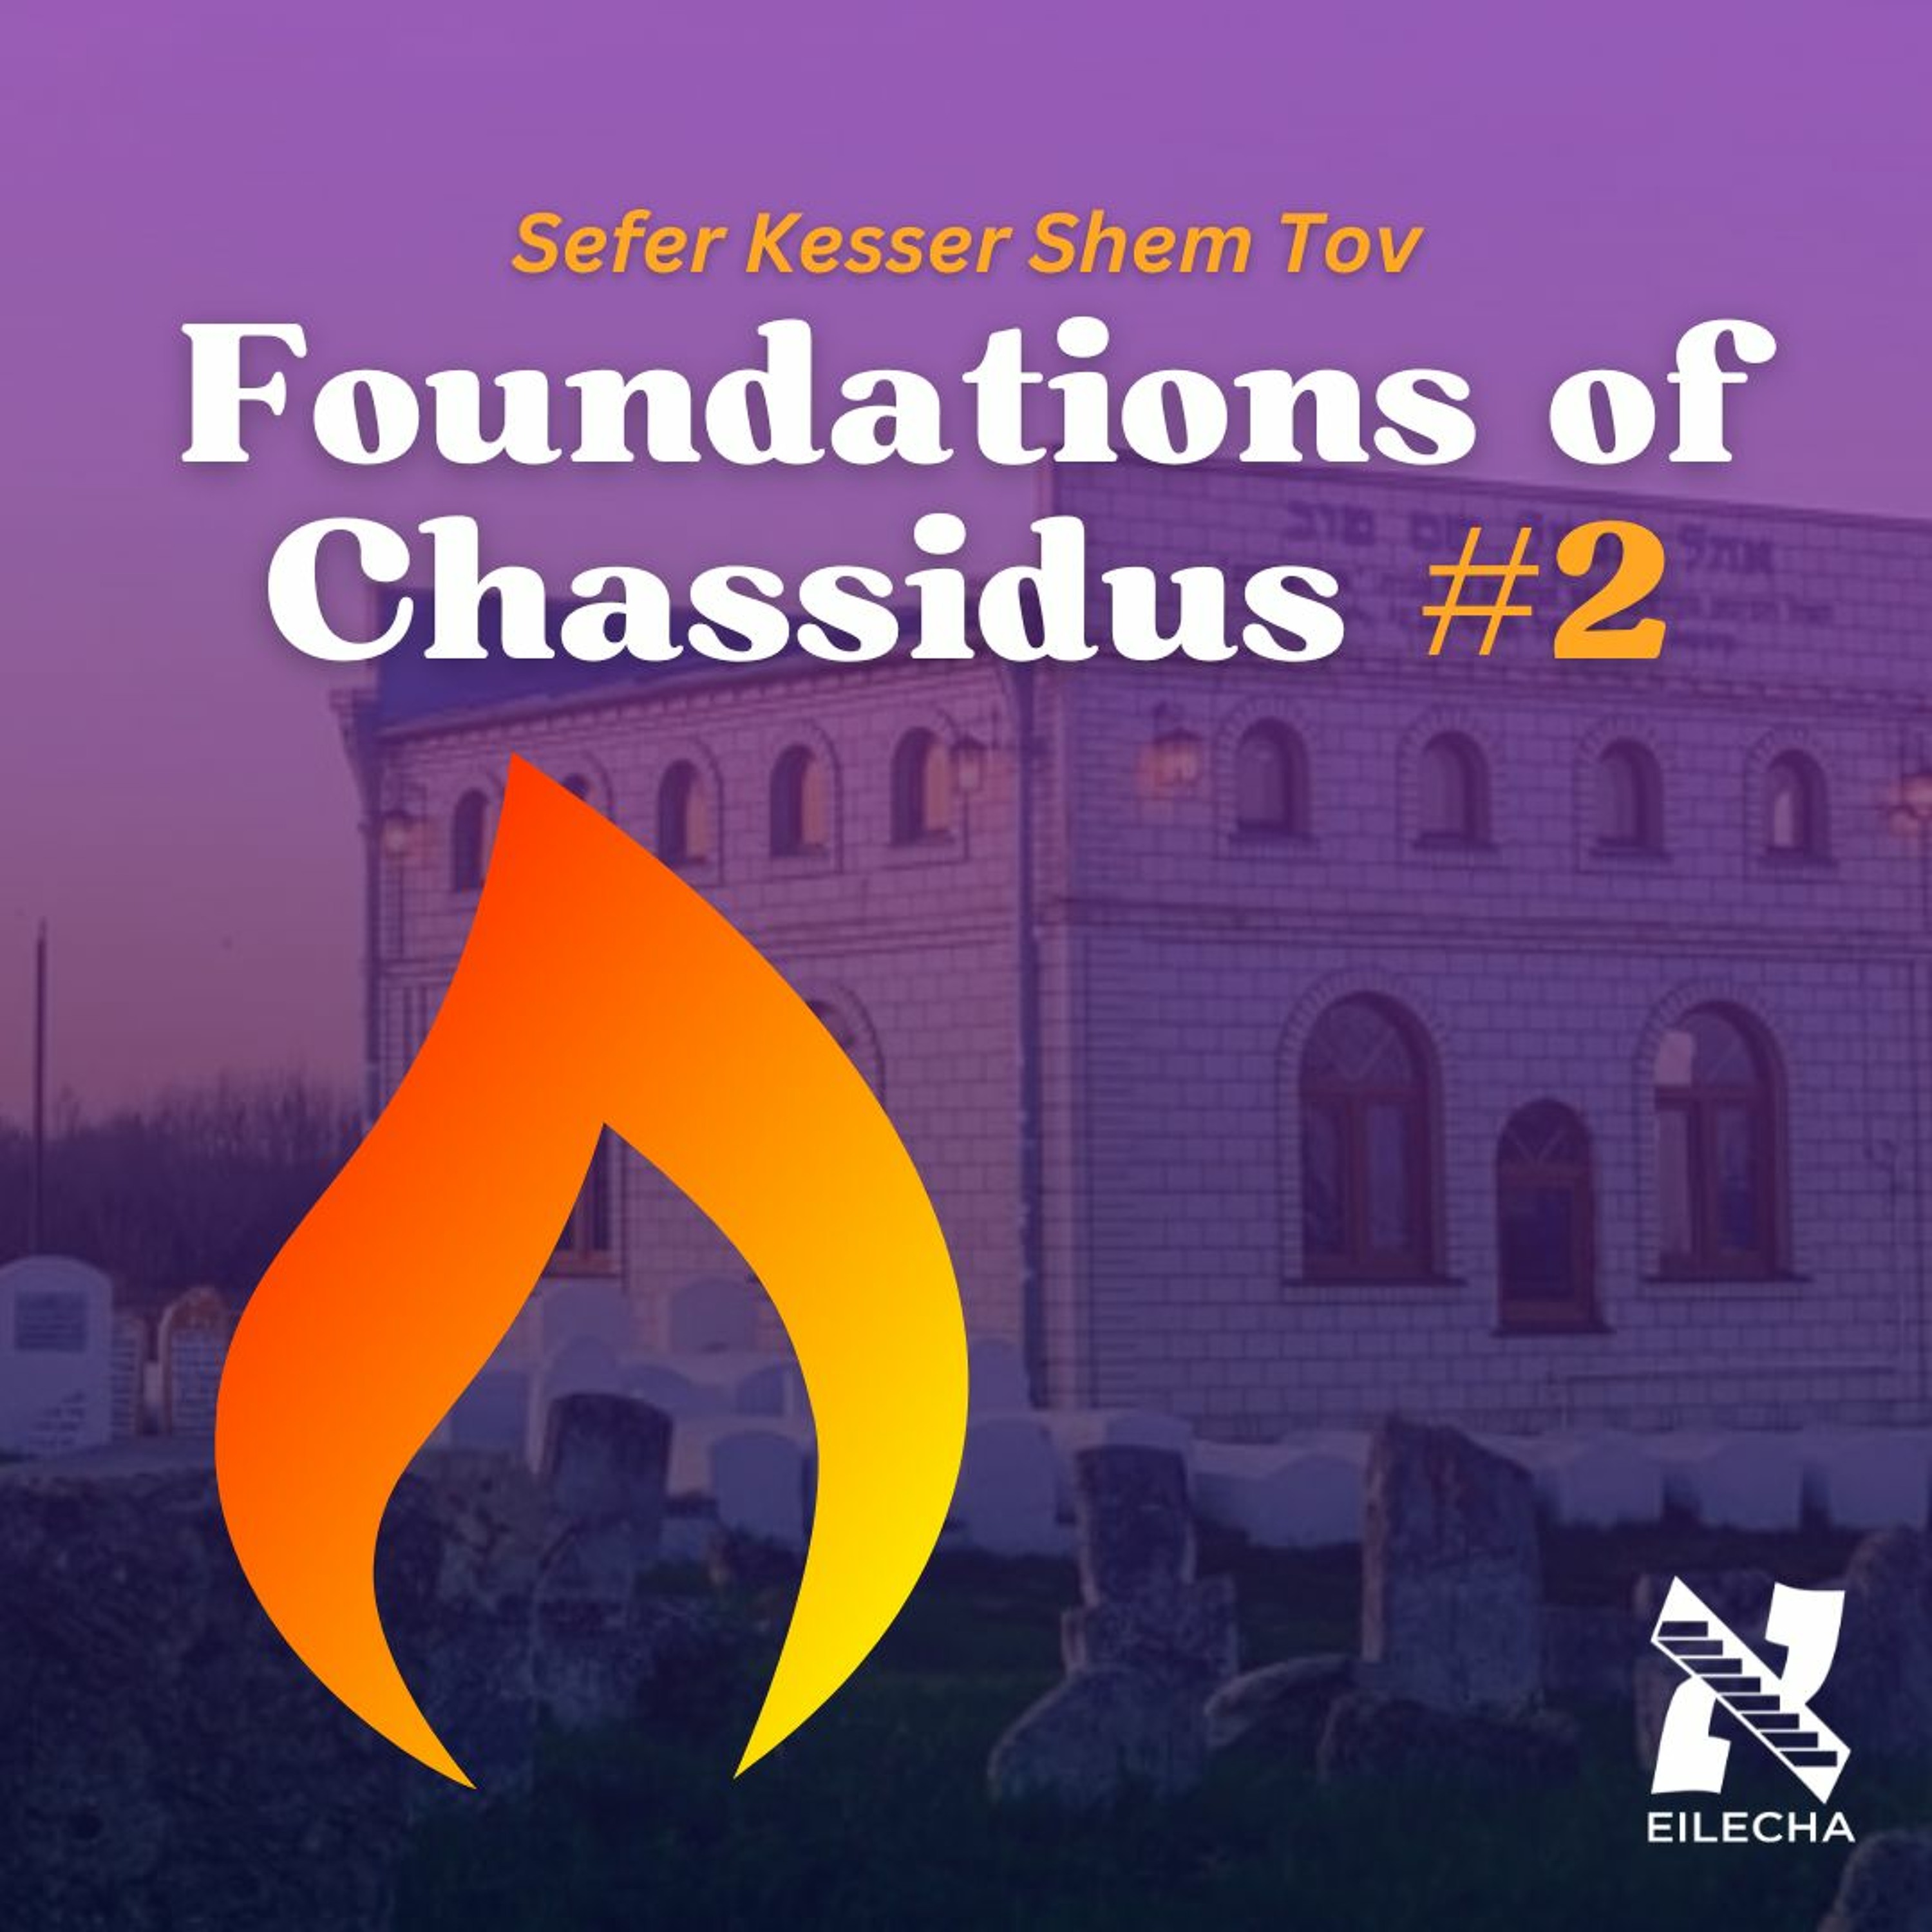 Foundations of Chassidus #2: Interpreting this Dream of a World